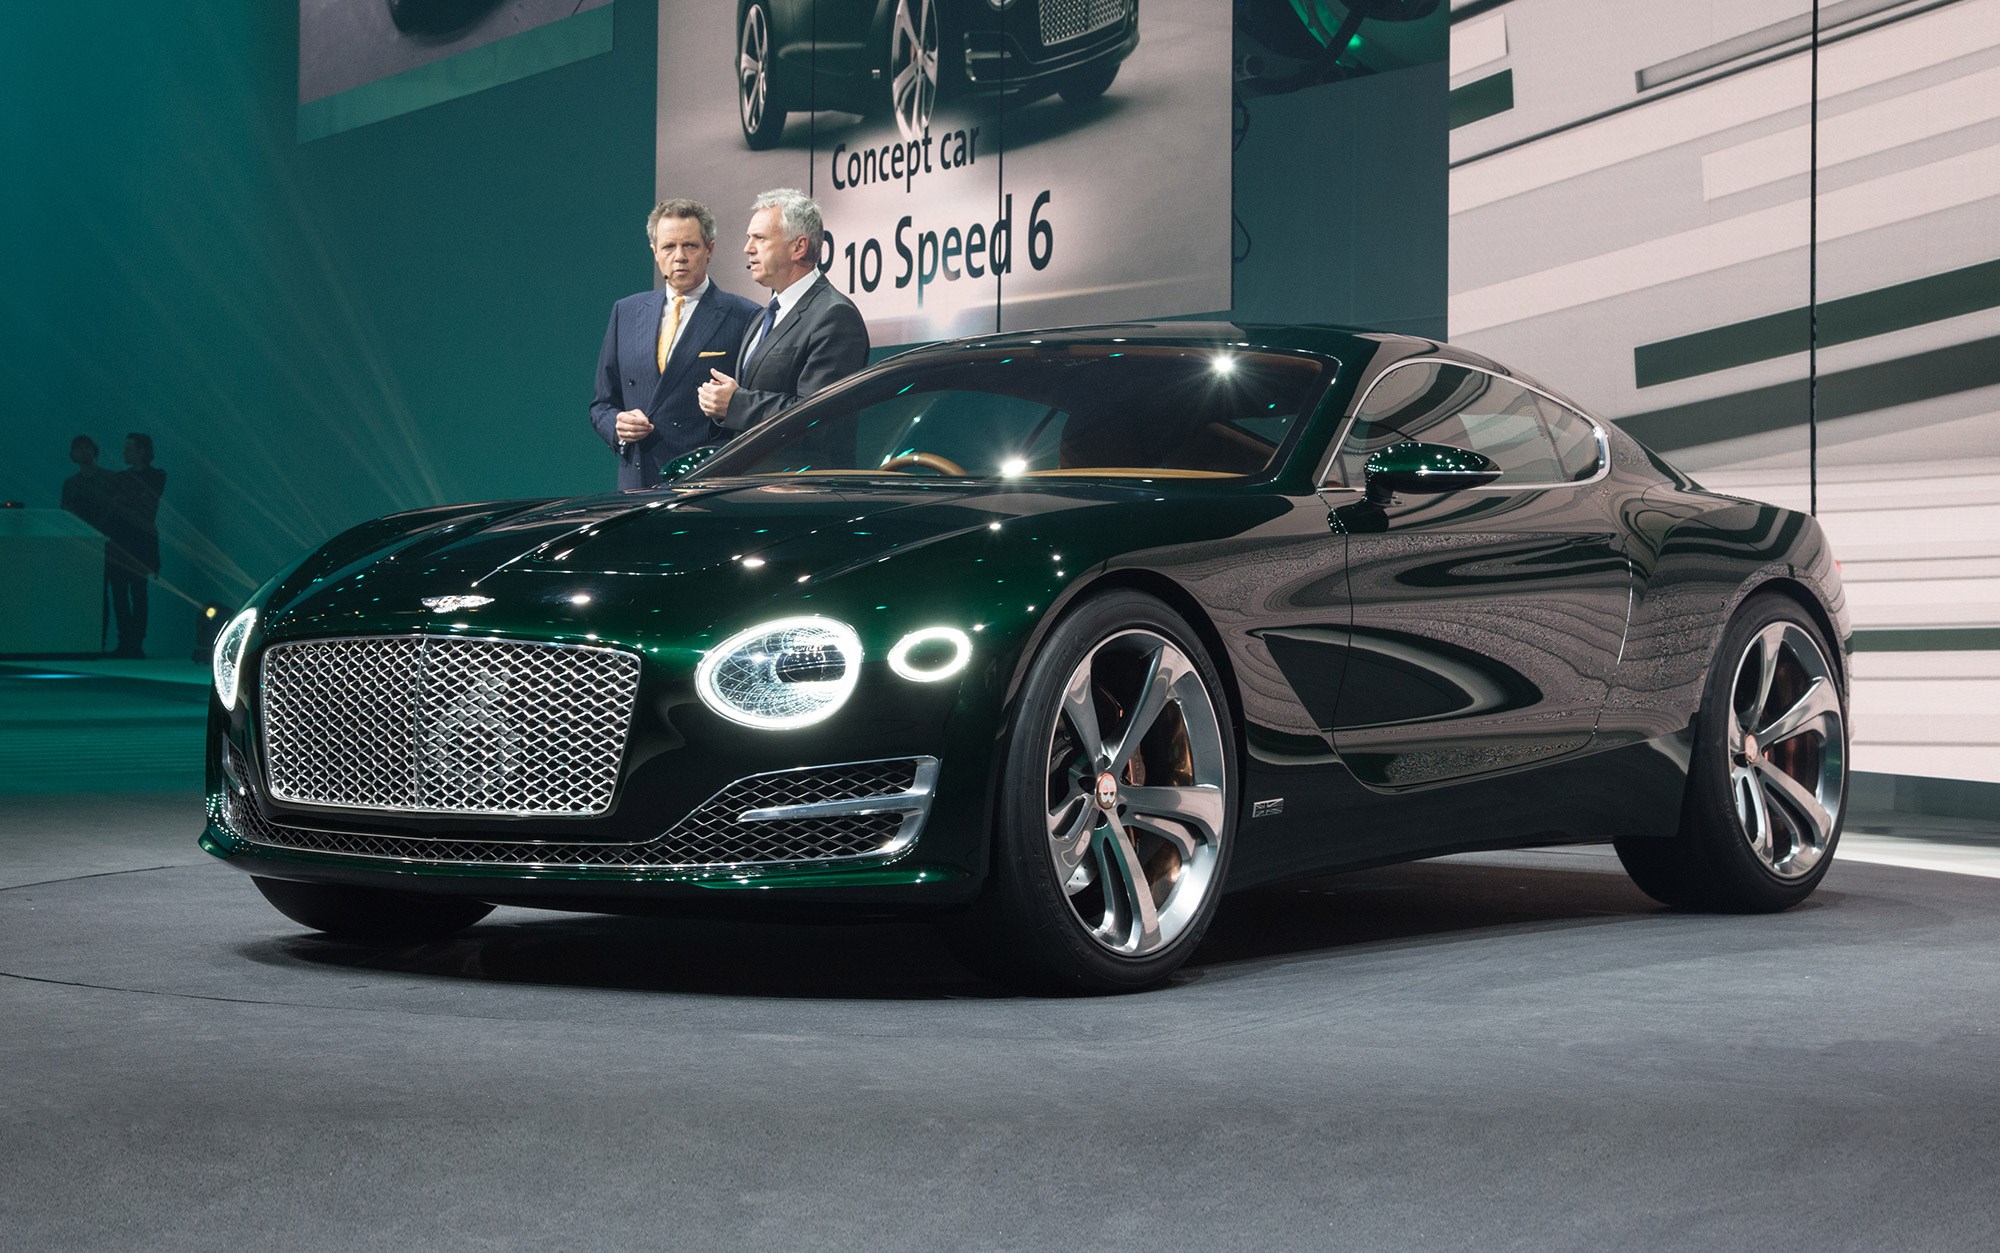 Now That S More Like It Bentley Exp 10 Speed 6 Points To New Two Seat Sports Car Car Magazine